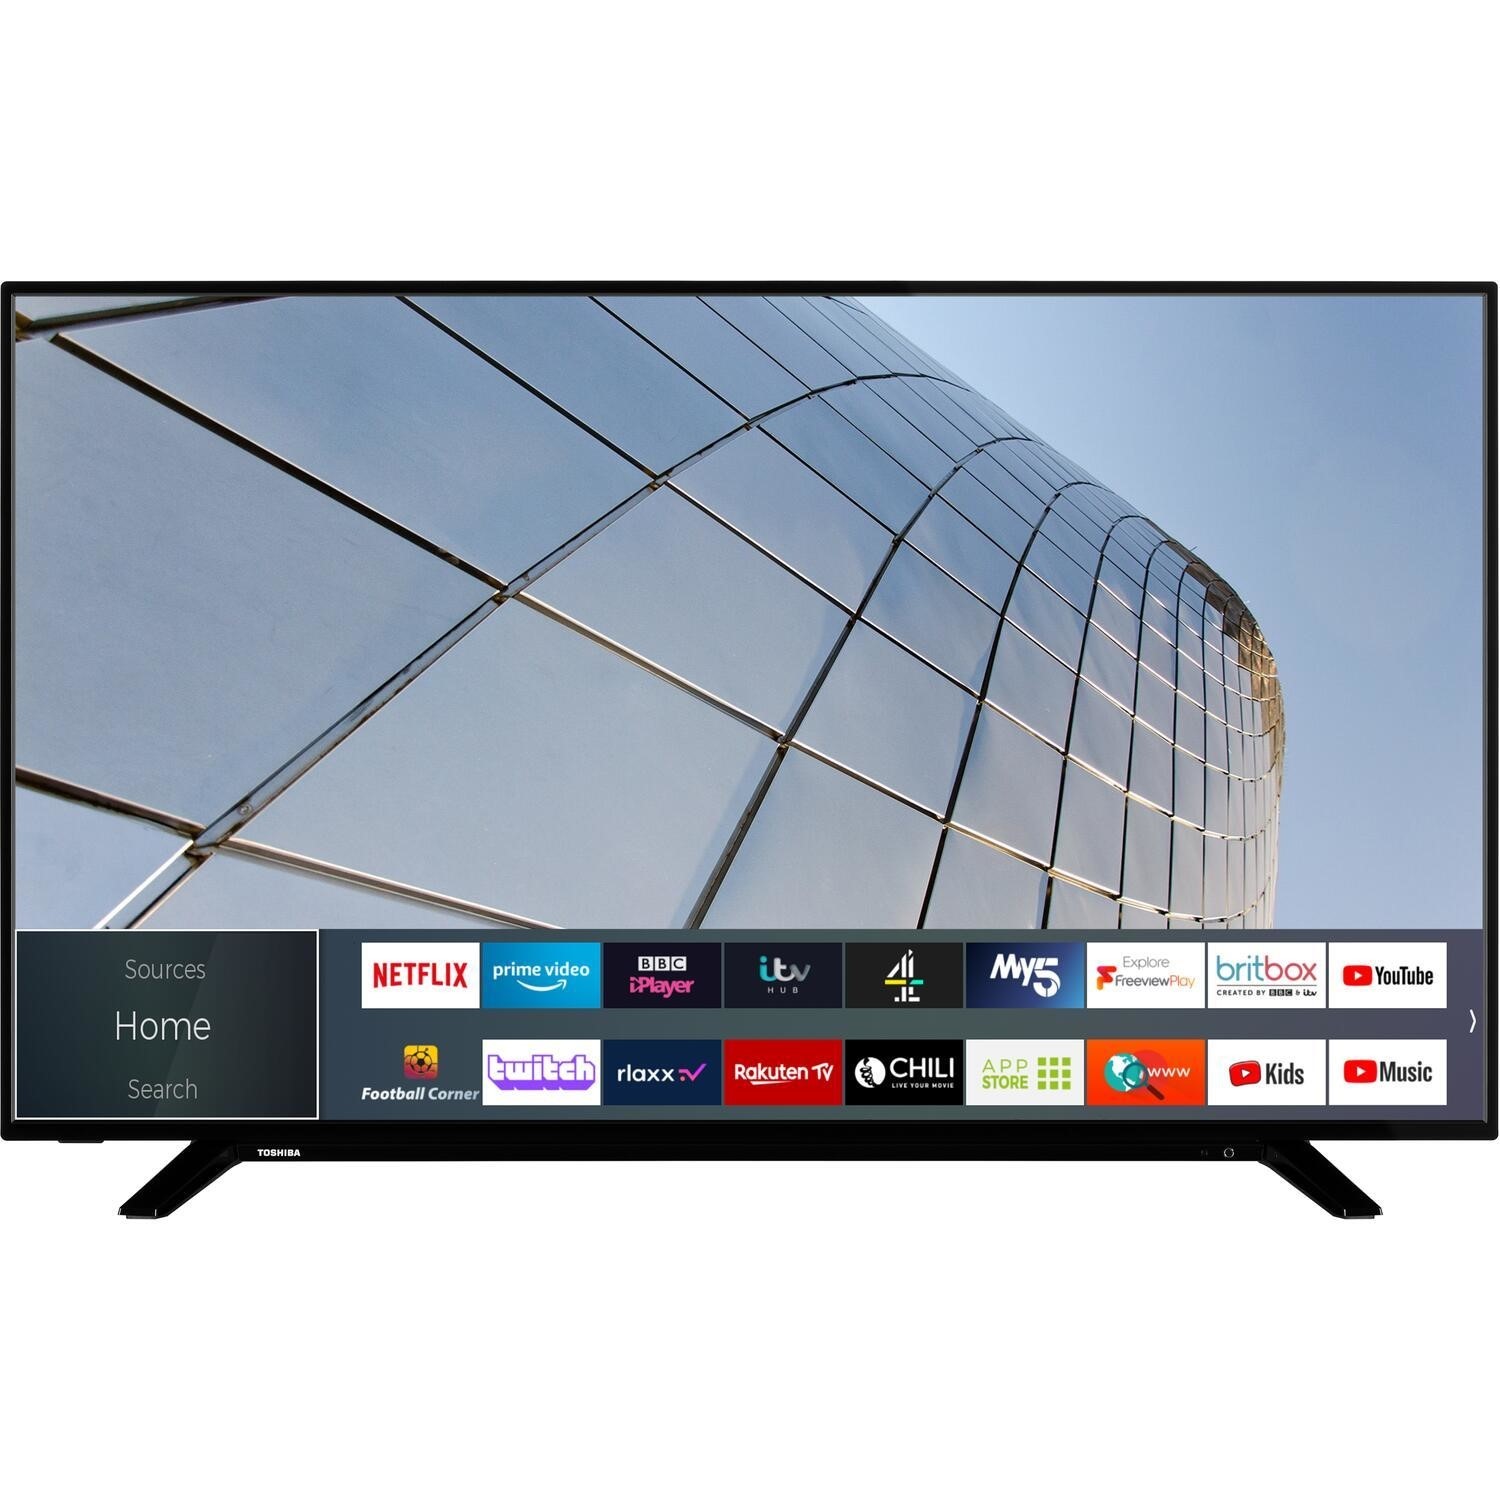 Toshiba UL21 55 Inch 4K HDR Freeview LED Smart TV